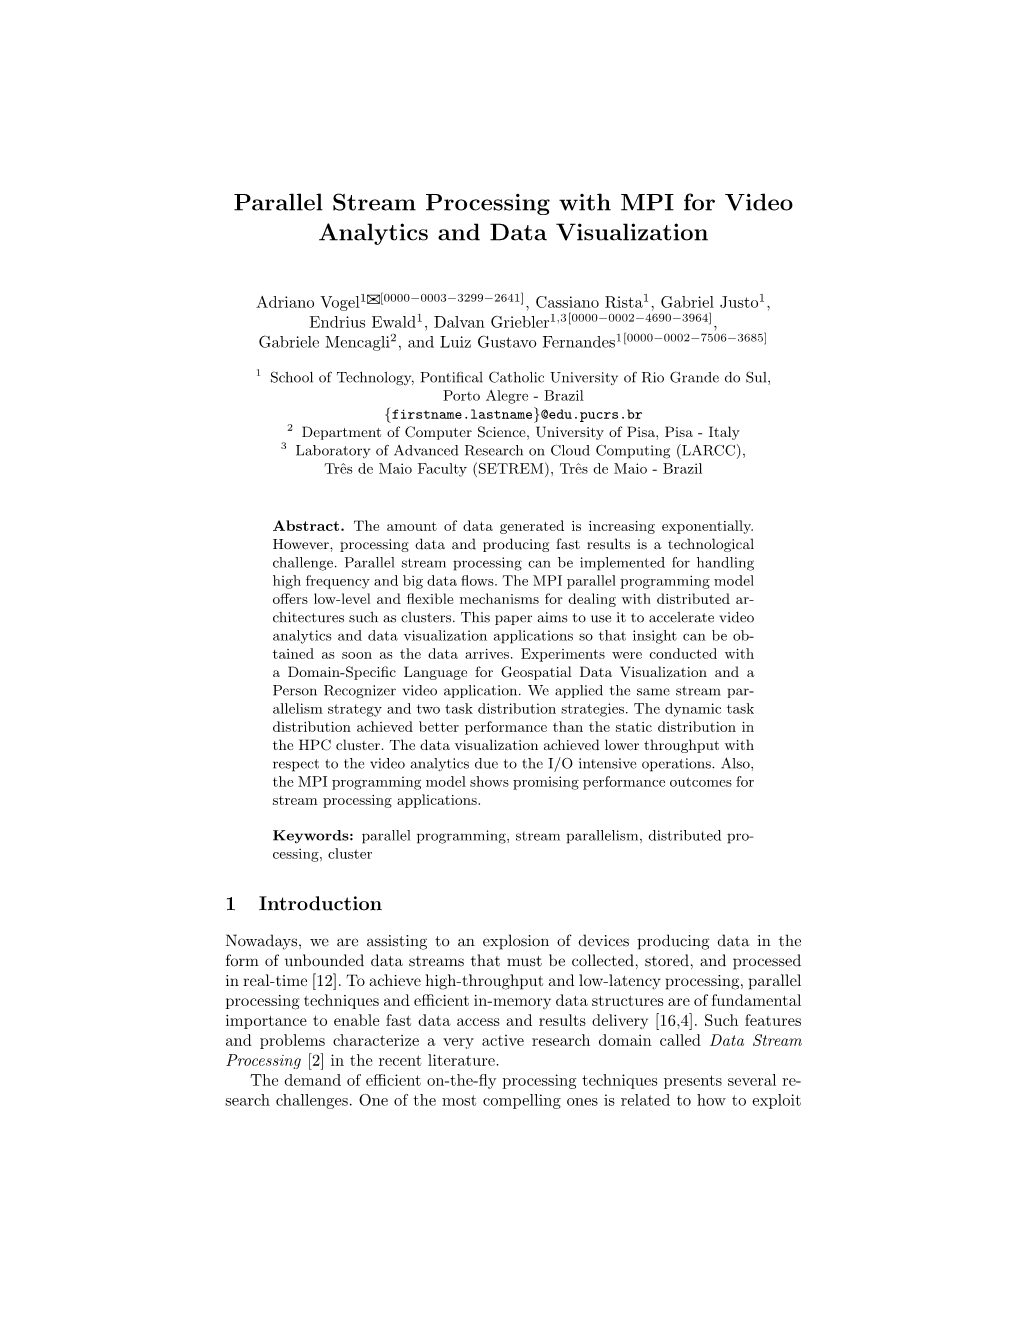 Parallel Stream Processing with MPI for Video Analytics and Data Visualization